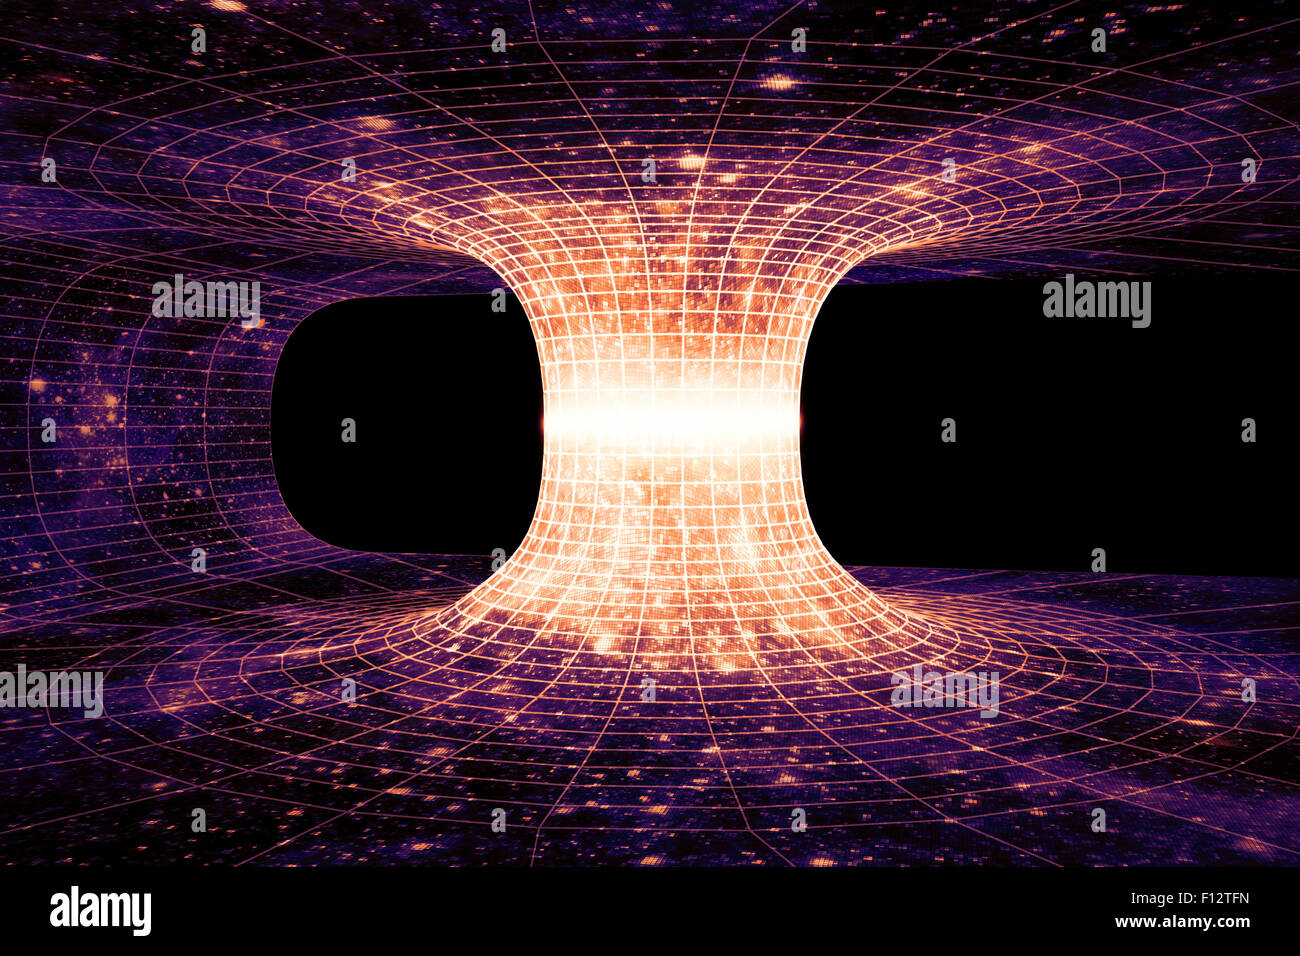 A wormhole, or Einstein-Rosen Bridge, is a hypothetical shortcut connecting two separate points in spacetime. Stock Photo